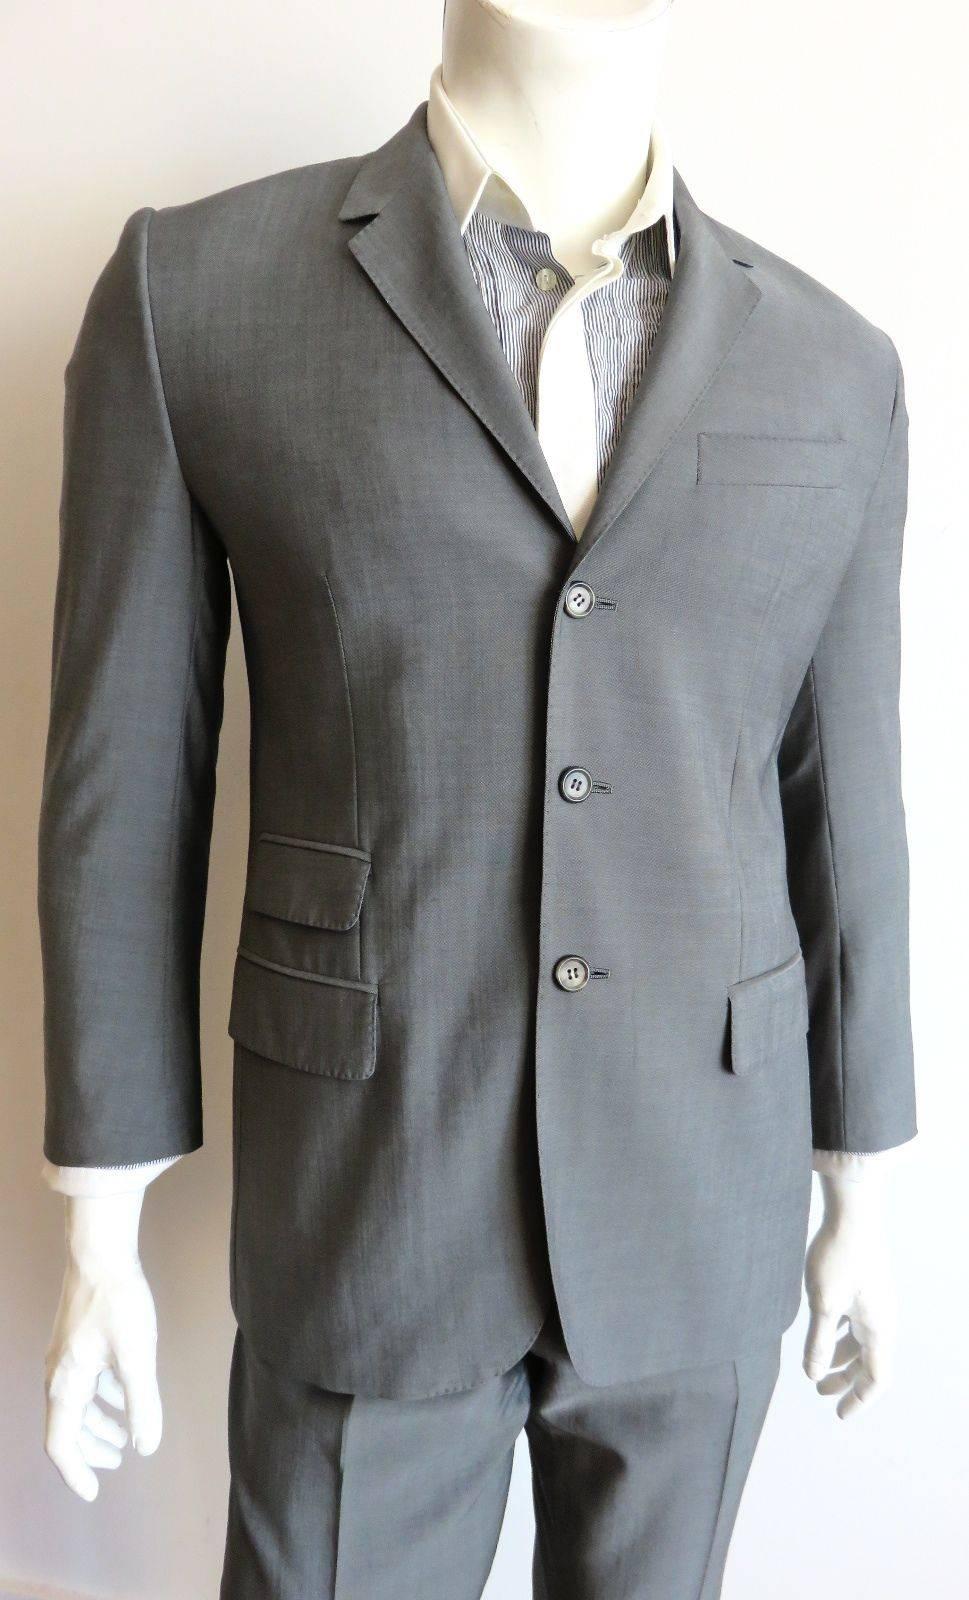 Pre-death, 2004, ALEXANDER MCQUEEN 2pc. suit.

Gorgeous, gray wool fabrication with a nice sheen.

Three-button front with twin waist level flap pockets, and third, ticket pocket detail at the right waist.

Flat front matching pants with